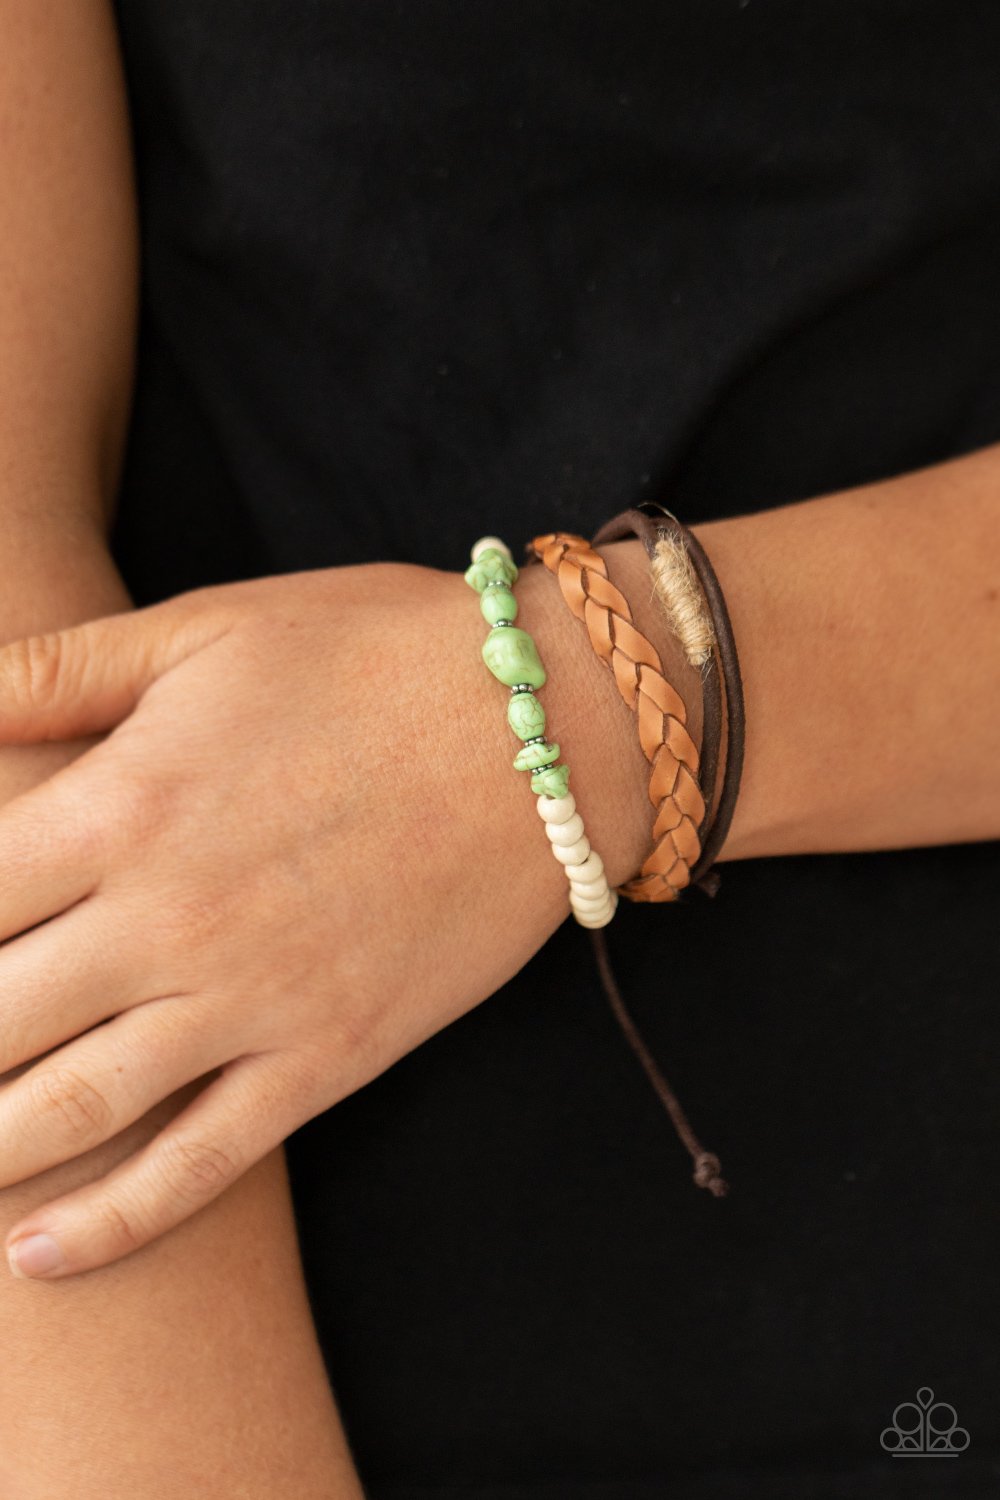 &lt;p&gt; Mismatched strands of brown suede, braided brown leather, and green stones and white wooden beads layer across the wrist for a colorful seasonal look. Features an adjustable sliding knot closure.&lt;/p&gt;

&lt;p&gt;&lt;i&gt; Sold as one individual bracelet.&lt;/i&gt;&lt;/p&gt;


